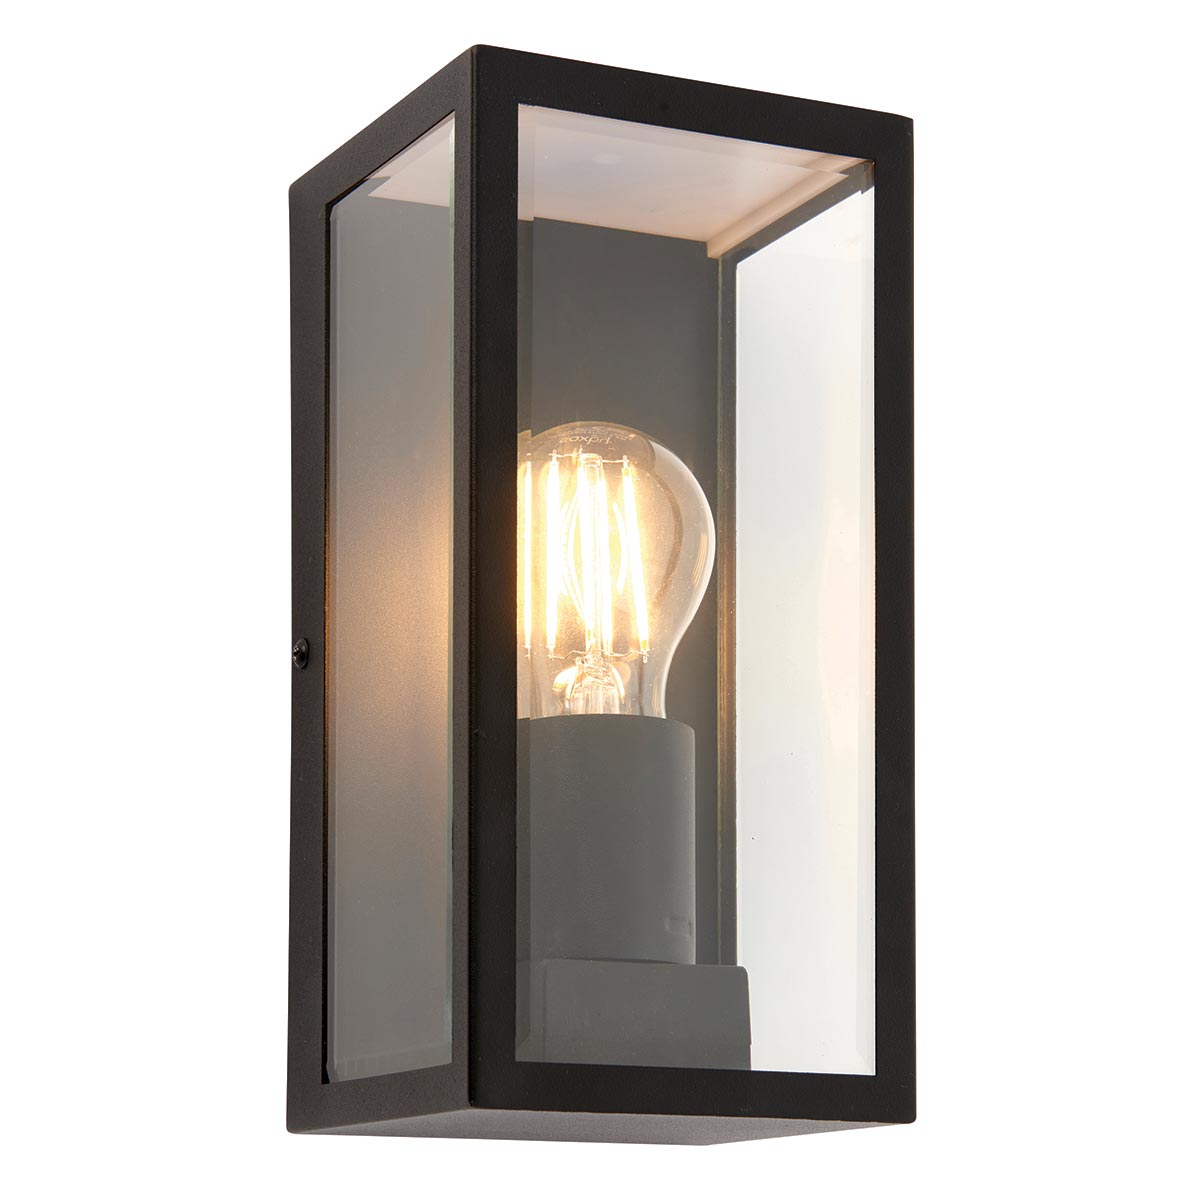 Endon Oxford Outdoor Wall Box Lantern Black Stainless Steel IP44